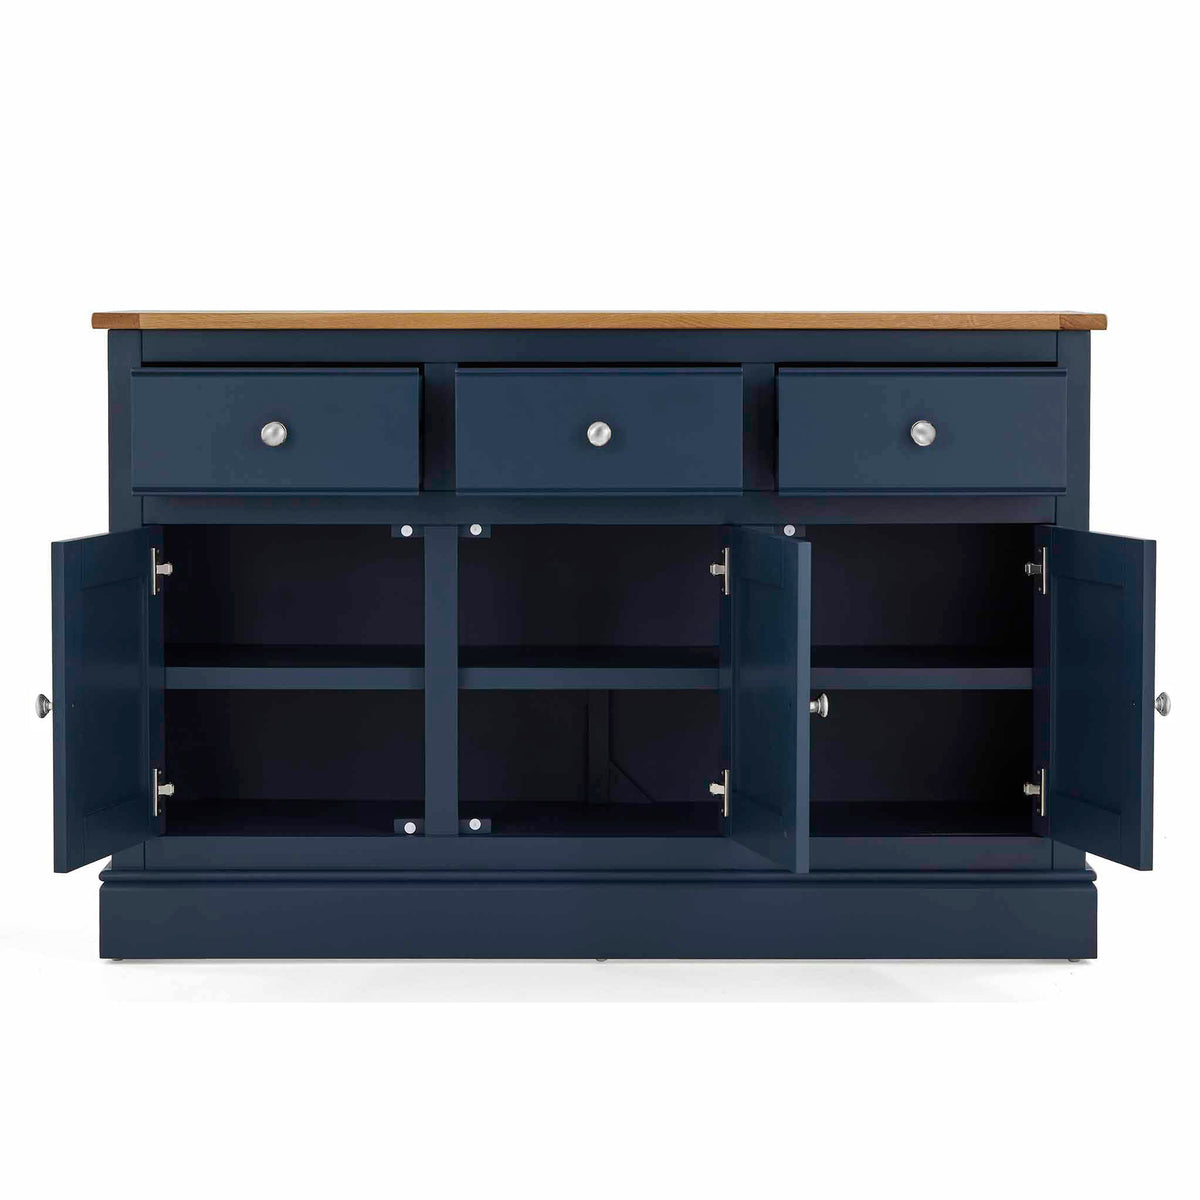 Chichester Stiffkey Blue Large Sideboard - Front view with doors open